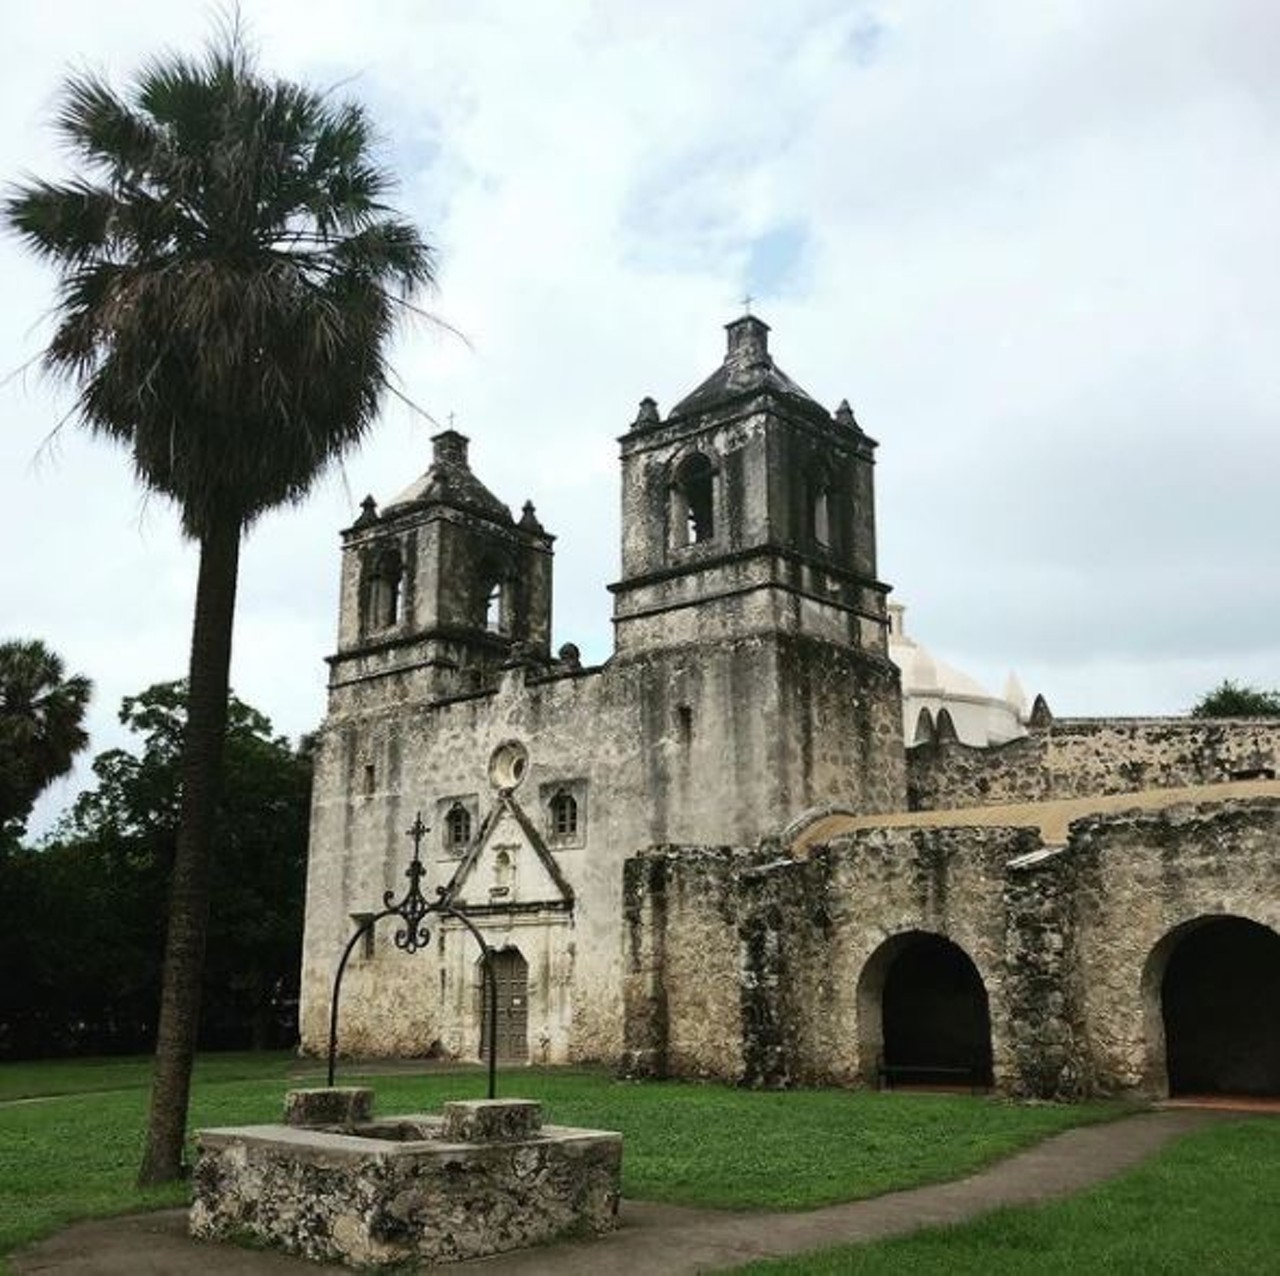 Tour the San Antonio Missions
(210) 932-1001, nps.gov/saan
Book a National Park Ranger-led tour online, take your own audio tour through the city’s heritage office website, or venture off on your own — whatever floats your boat. Whether you’ve walked the trails a dozen times or have put off going for years, you’re sure to learn something new about San Antonio history.
Photo via Instagram / bozemanbenjamin